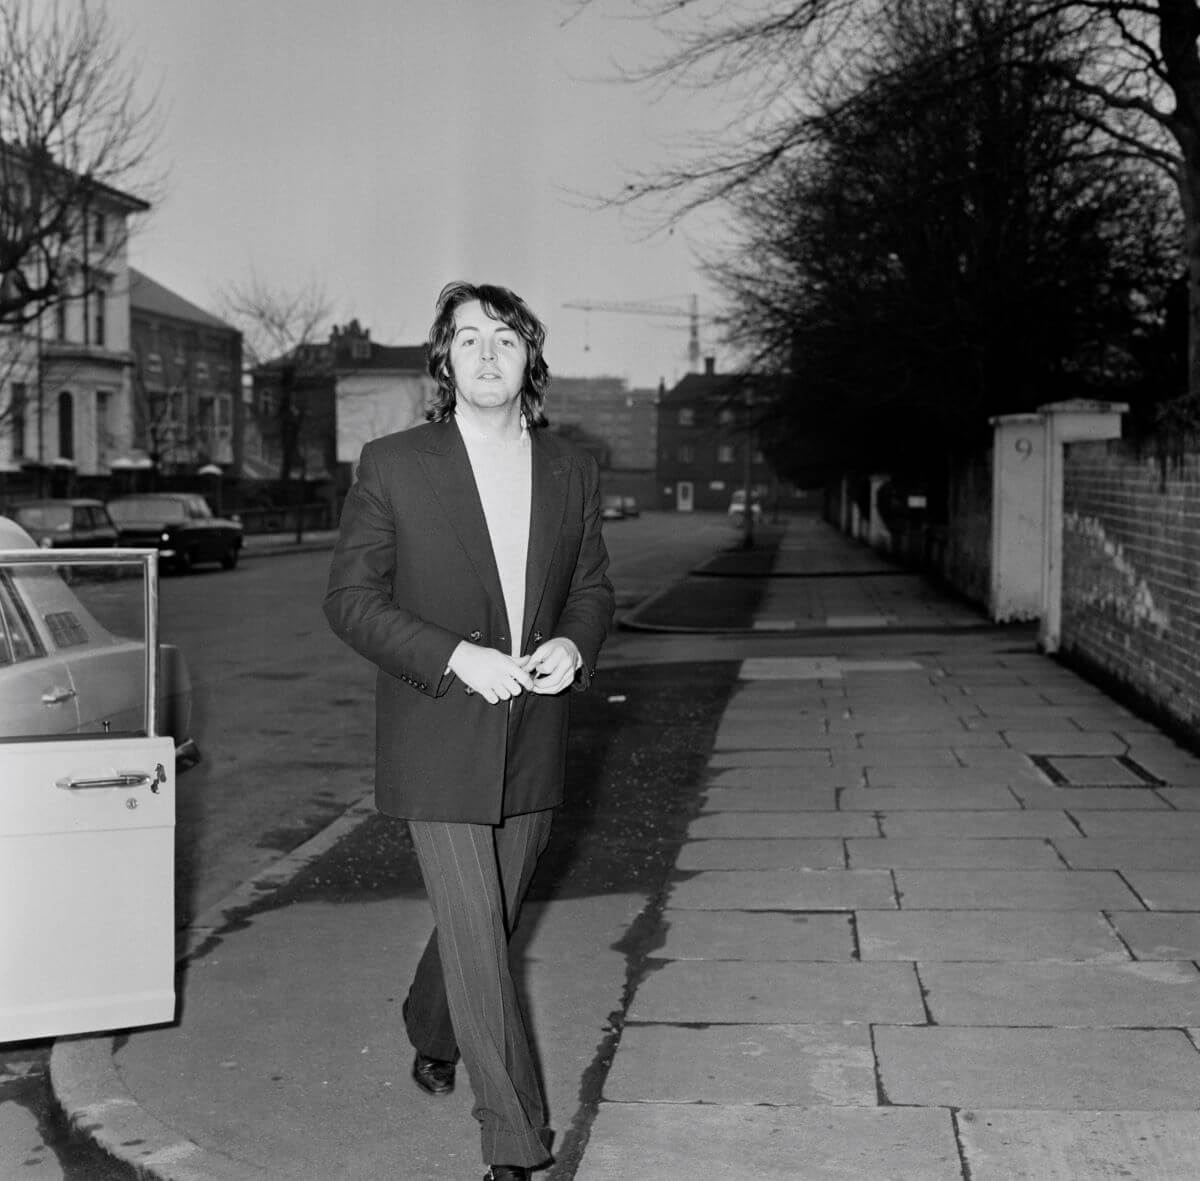 A black and white picture of Paul McCartney walking next to a car.